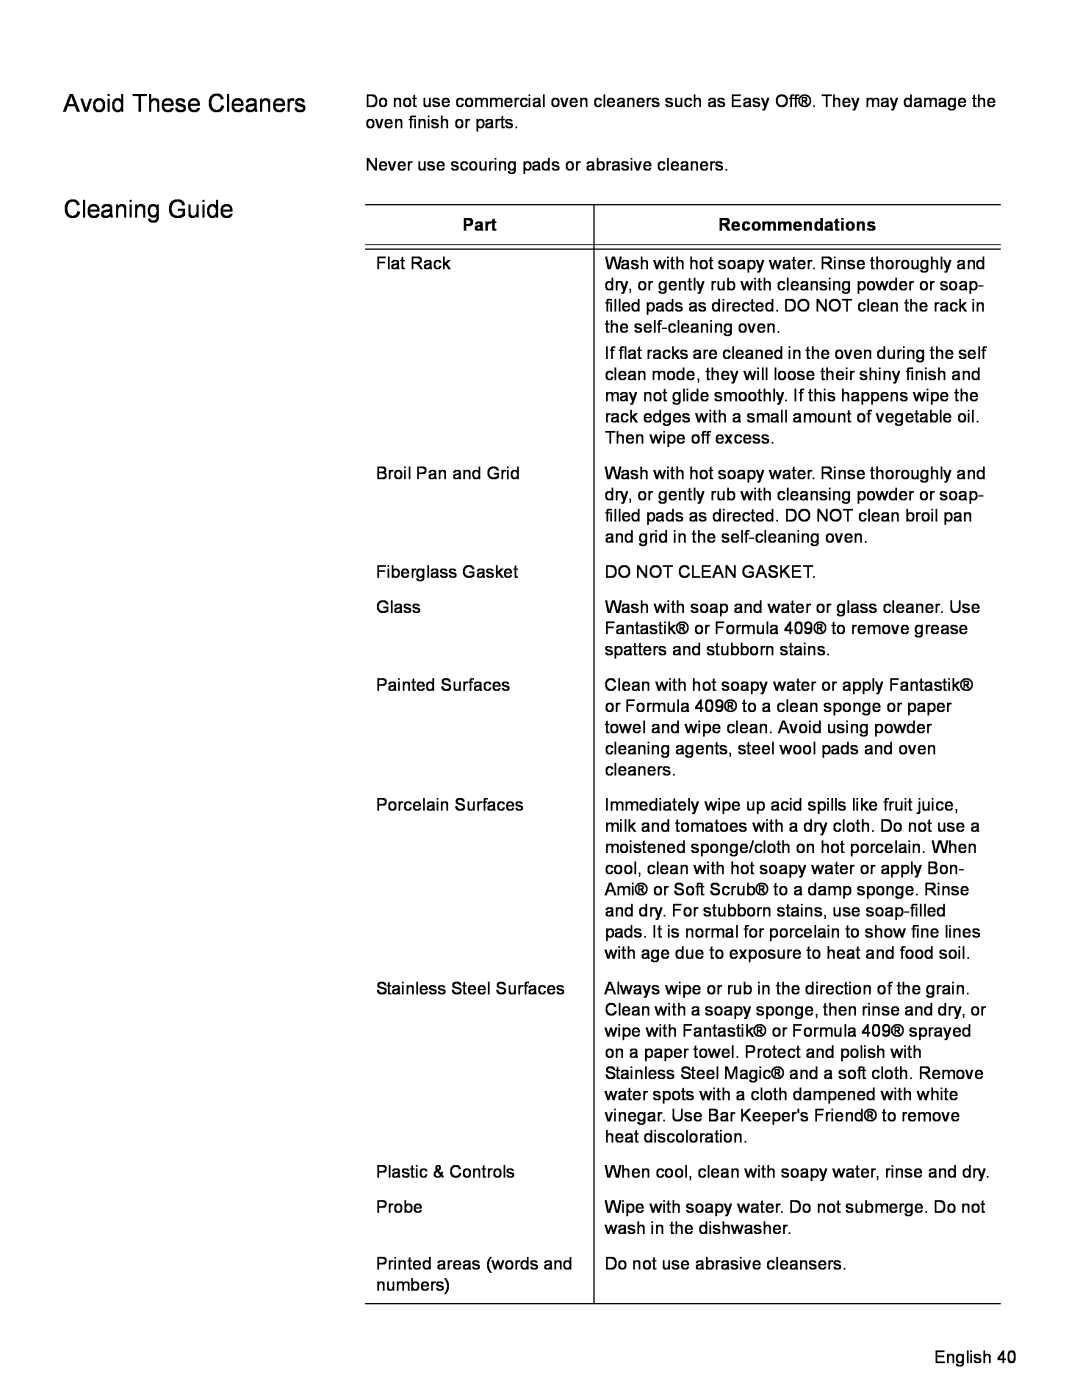 Bosch Appliances HBN56, HBL57, HBL56, HBL54, HBN54 manual Avoid These Cleaners Cleaning Guide, Part, Recommendations 